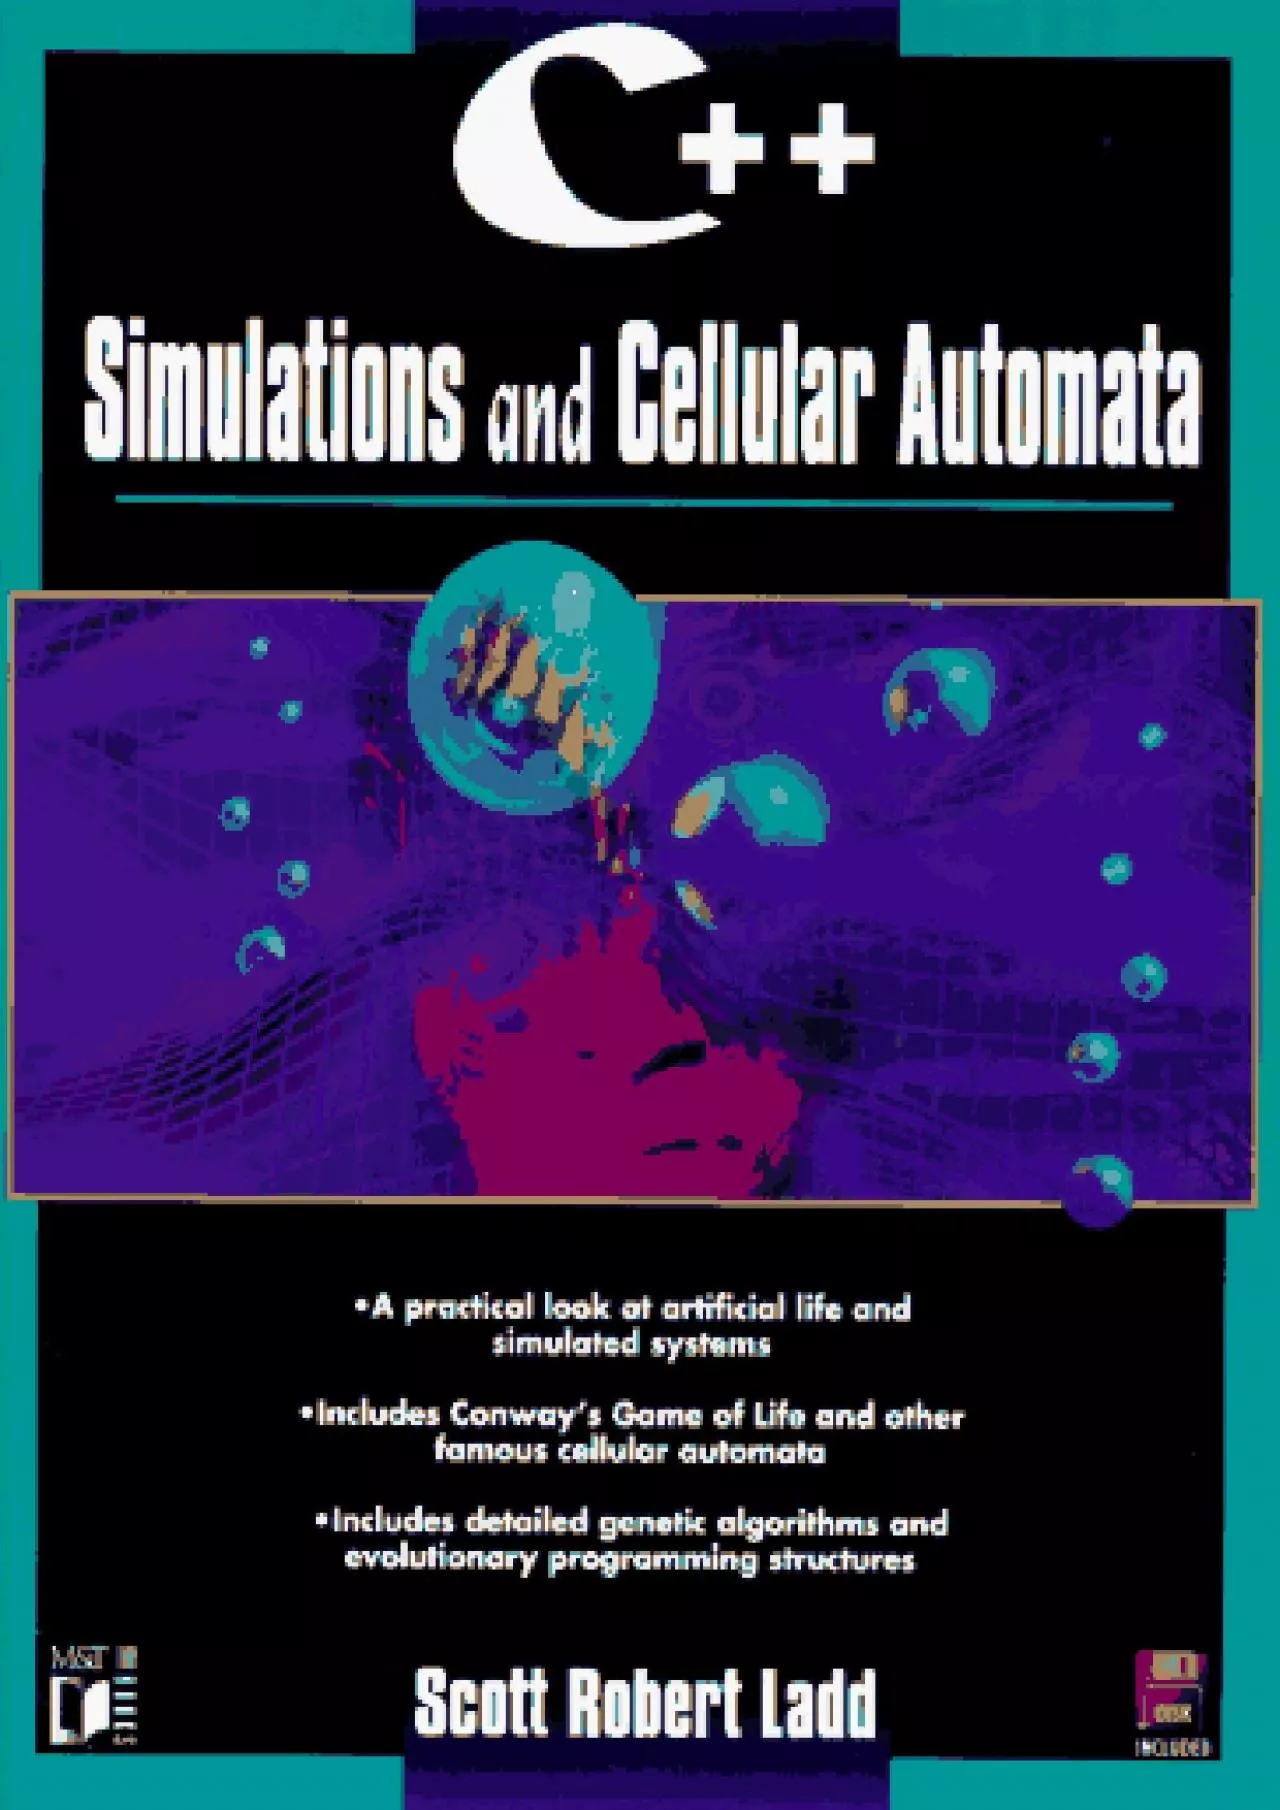 [FREE]-C++ Simulations and Cellular Automata